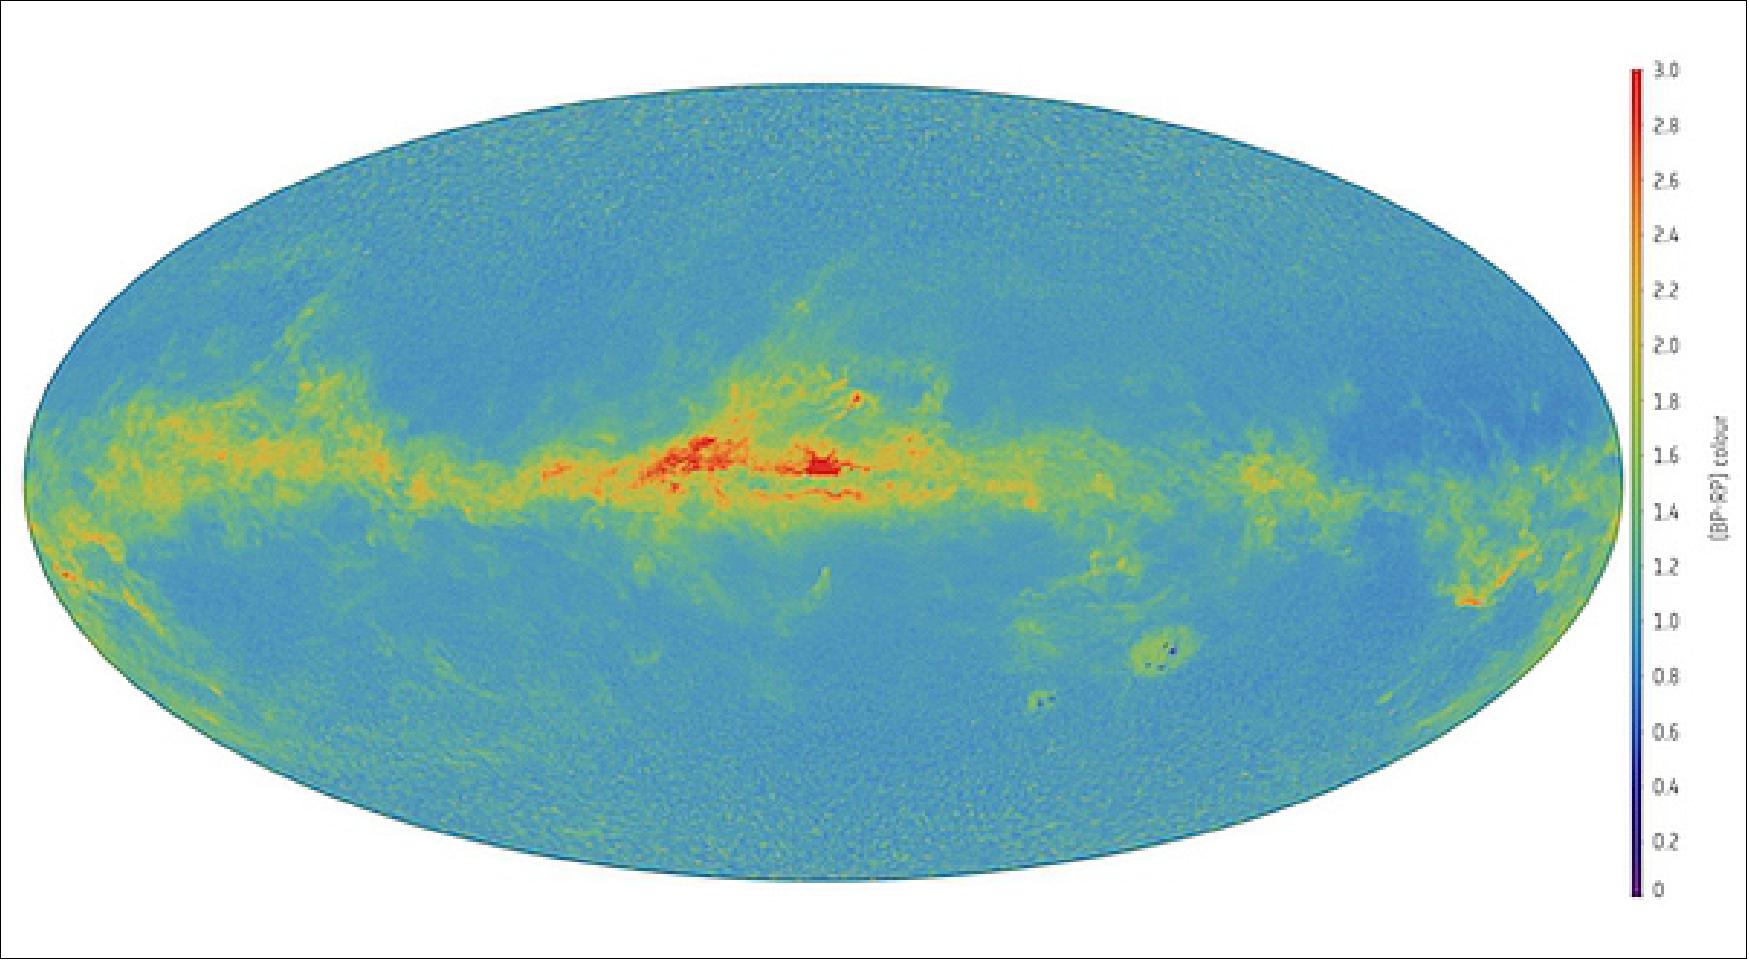 Figure 67: This map is a preview of Gaia's measurements of the sky in color, generated using preliminary data from the photometric instrument on board (image credit: ESA/Gaia/DPAC/CU5/DPCI/CU8/F. De Angeli, D.W. Evans, M. Riello, M. Fouesneau, R. Andrae, C.A.L. Bailer-Jones)